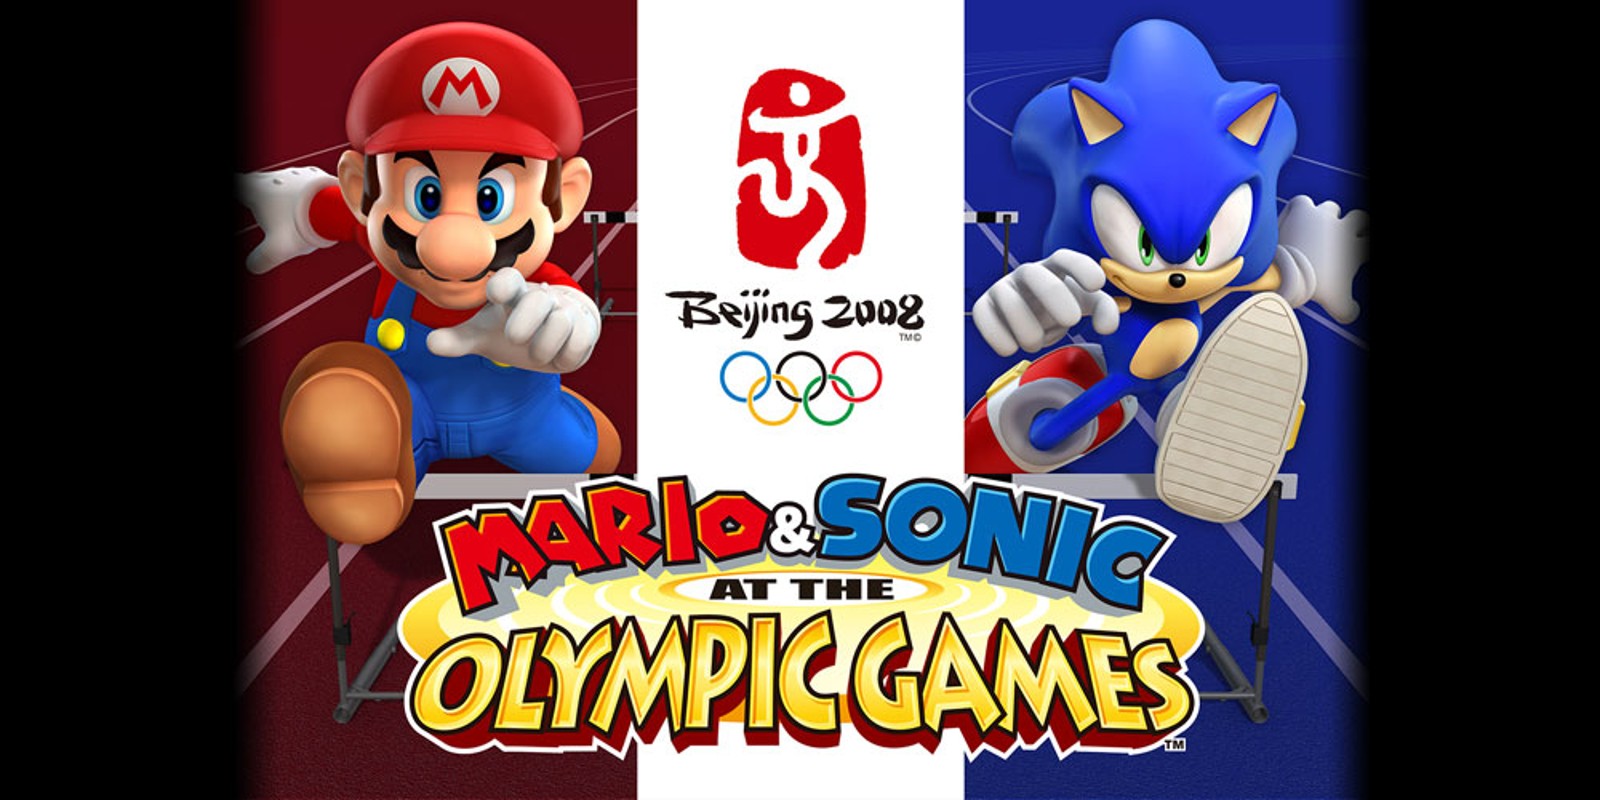 Mario & Sonic at the Olympic Games Wii Games Nintendo